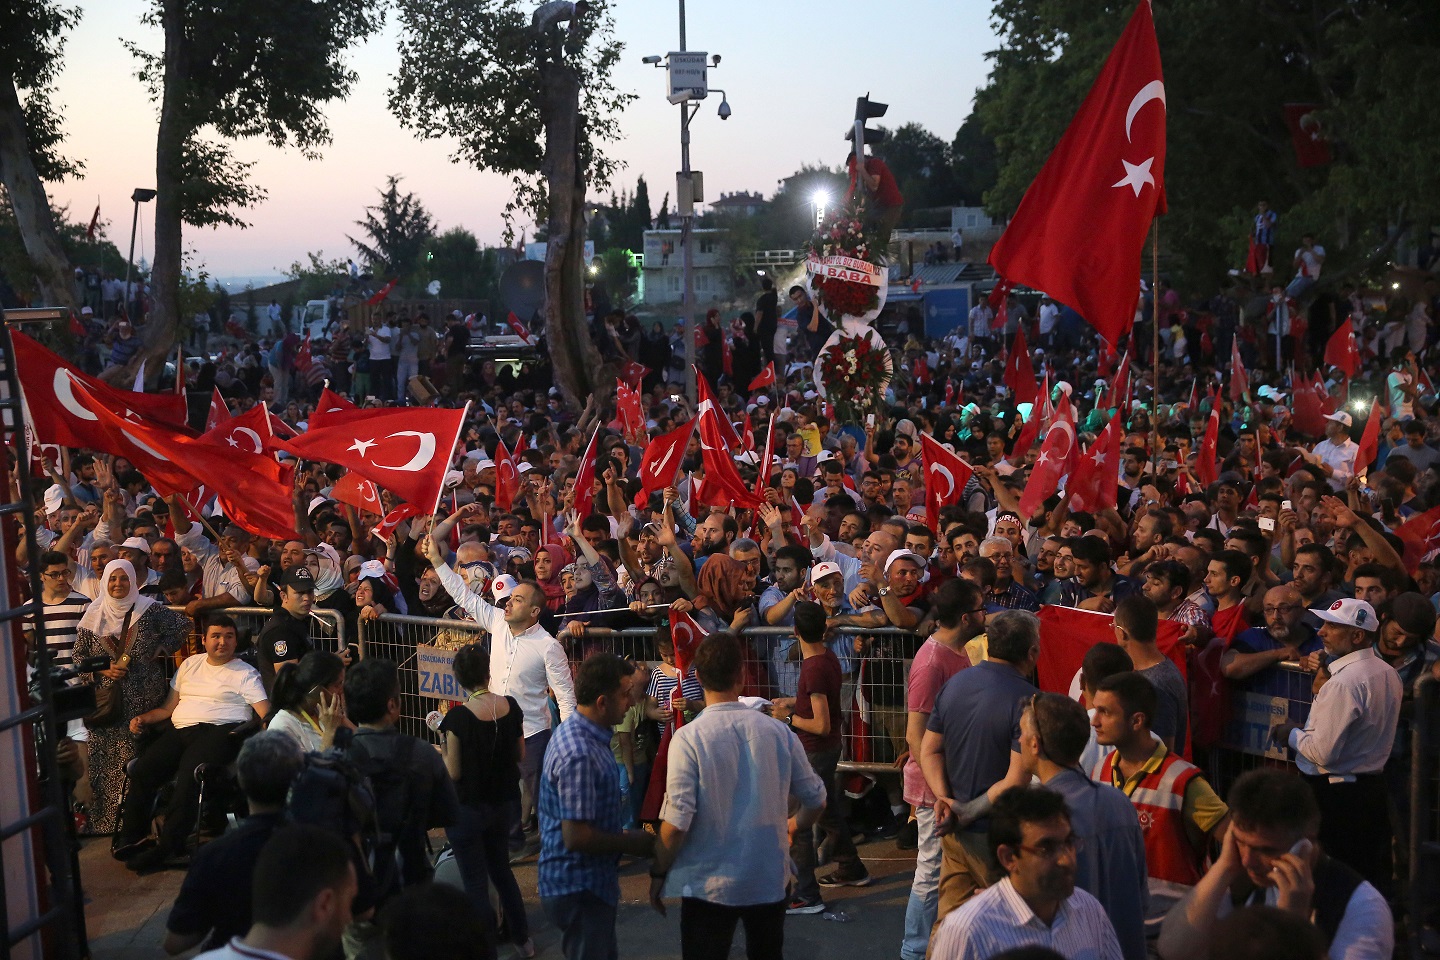 The people who gathered in front of the presidential residence with Turkish flags.